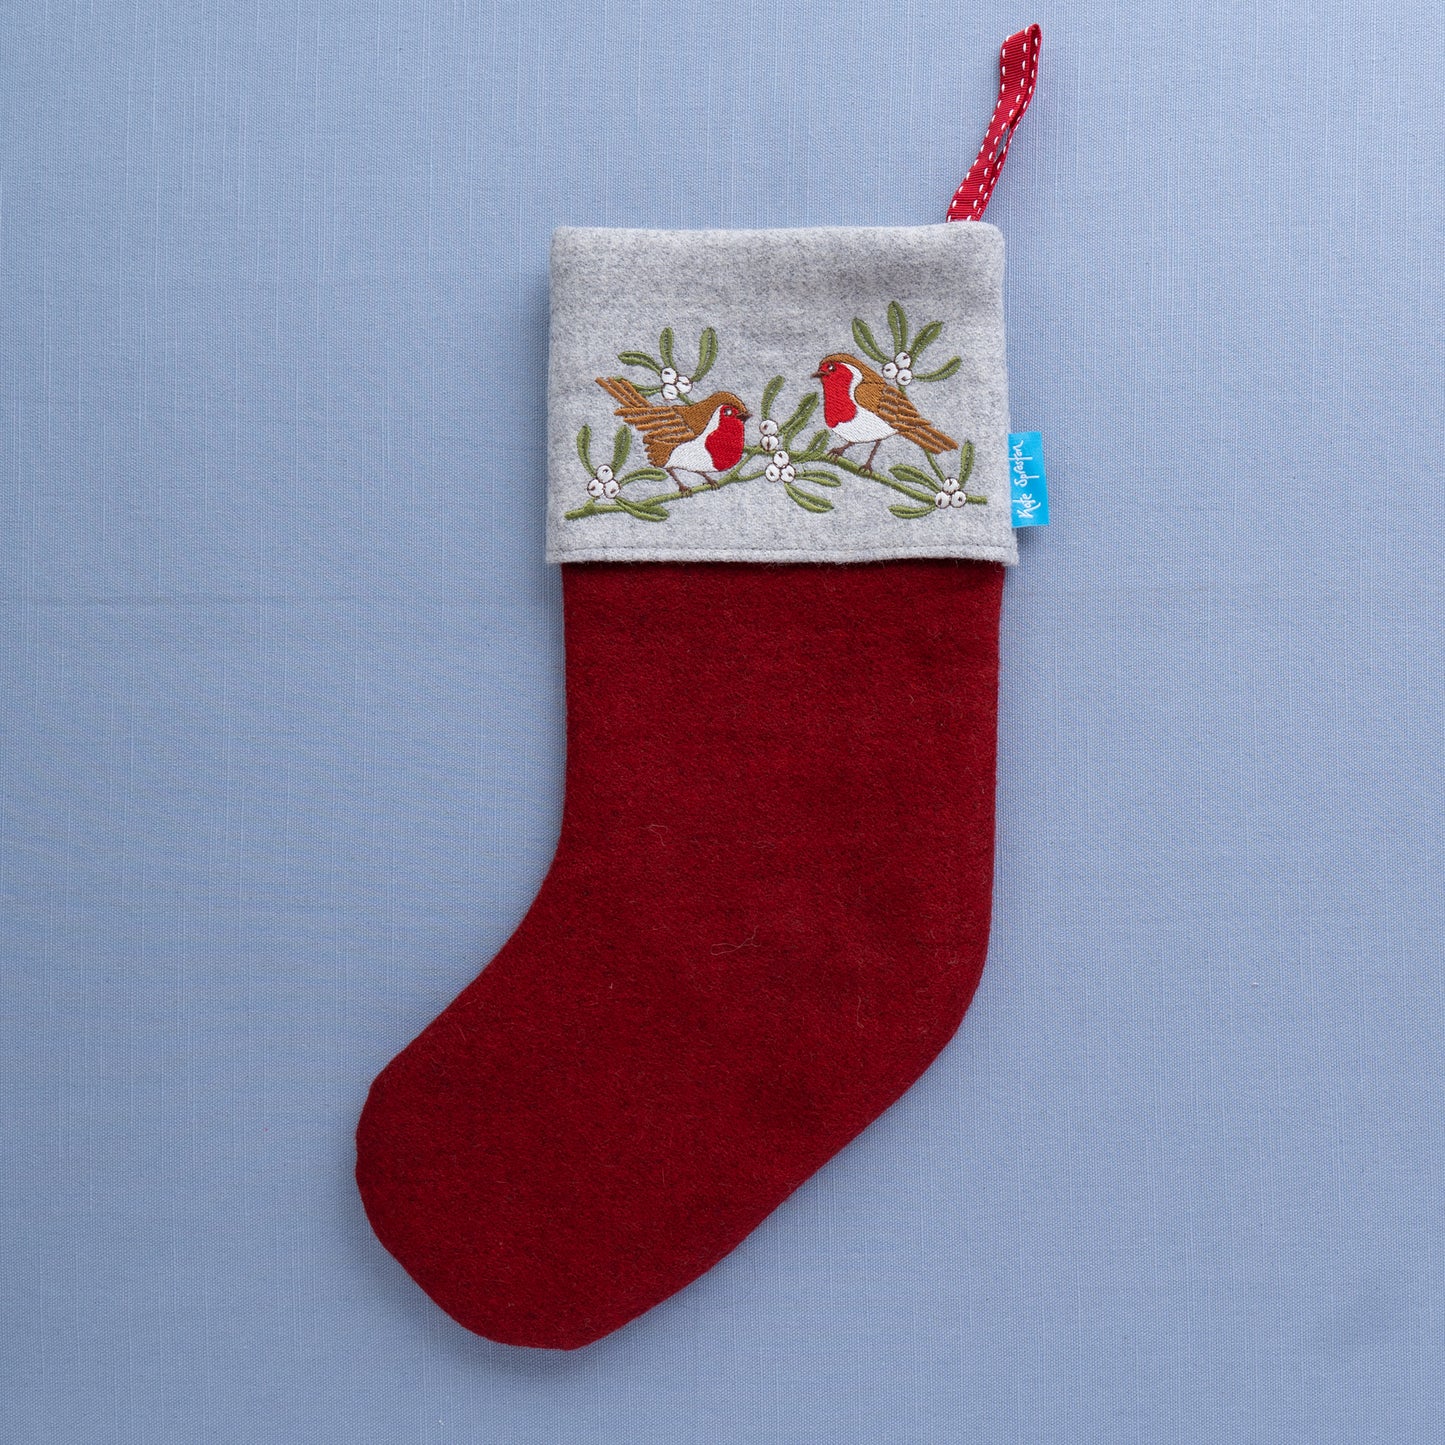 Second - Embroidered Robin and Mistletoe Christmas Stocking - Large - Missing Detail